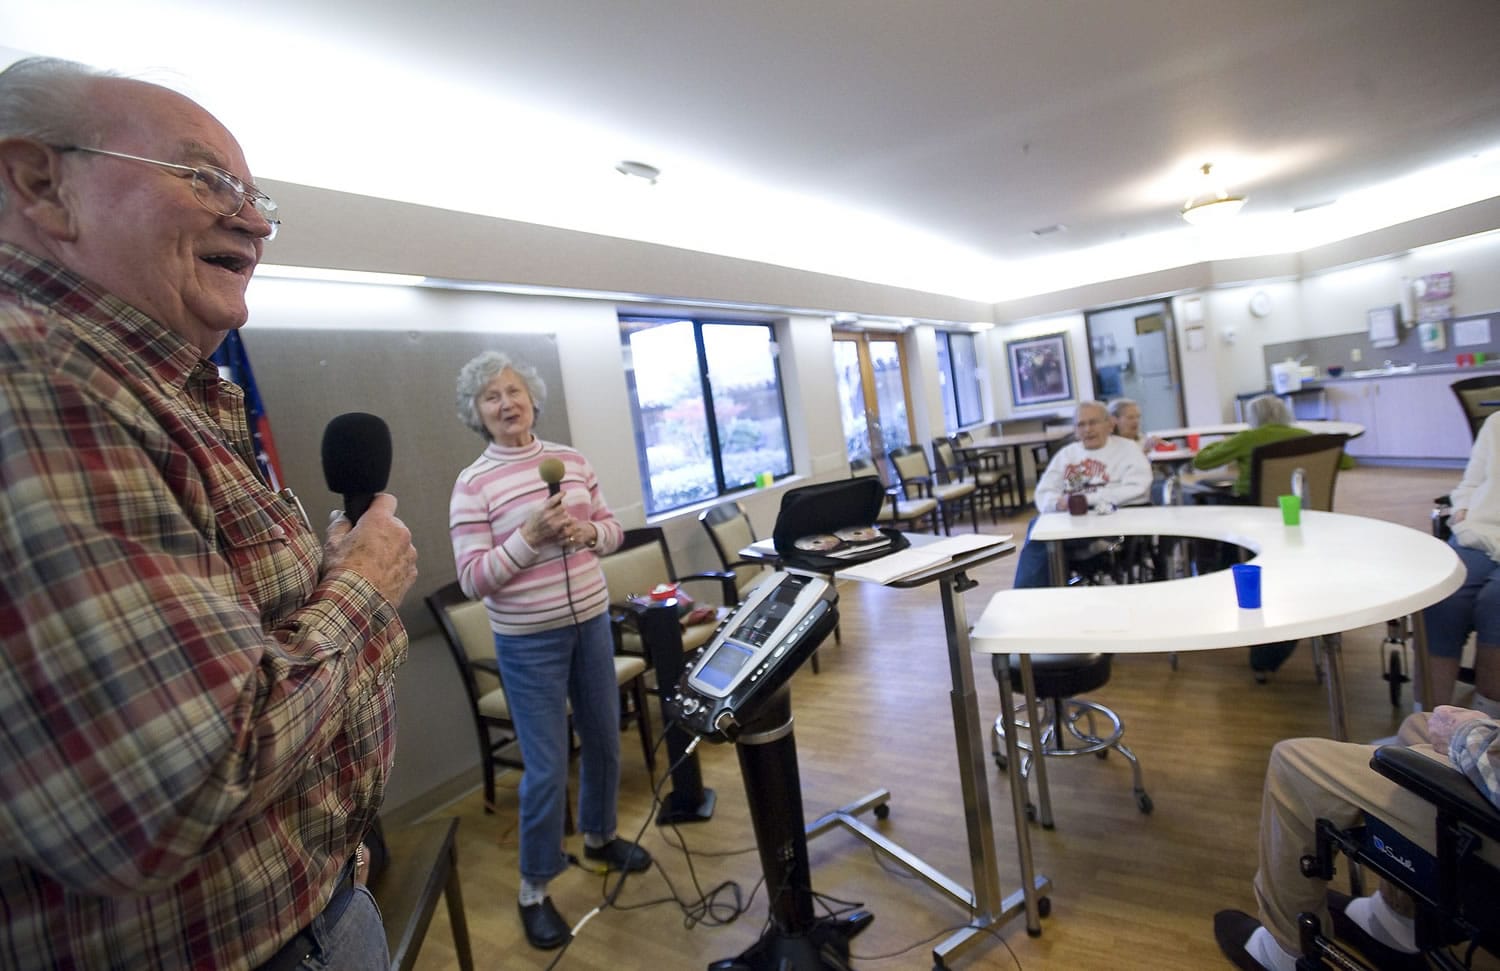 Lenard and Faye Davis entertain a group of seniors at Vancouver's Caretique memory care facility. Faye was diagnosed with Alzheimer's disease in 2006. Lenard uses the performances as an opportunity to relieve stress and keep their minds off the disease.